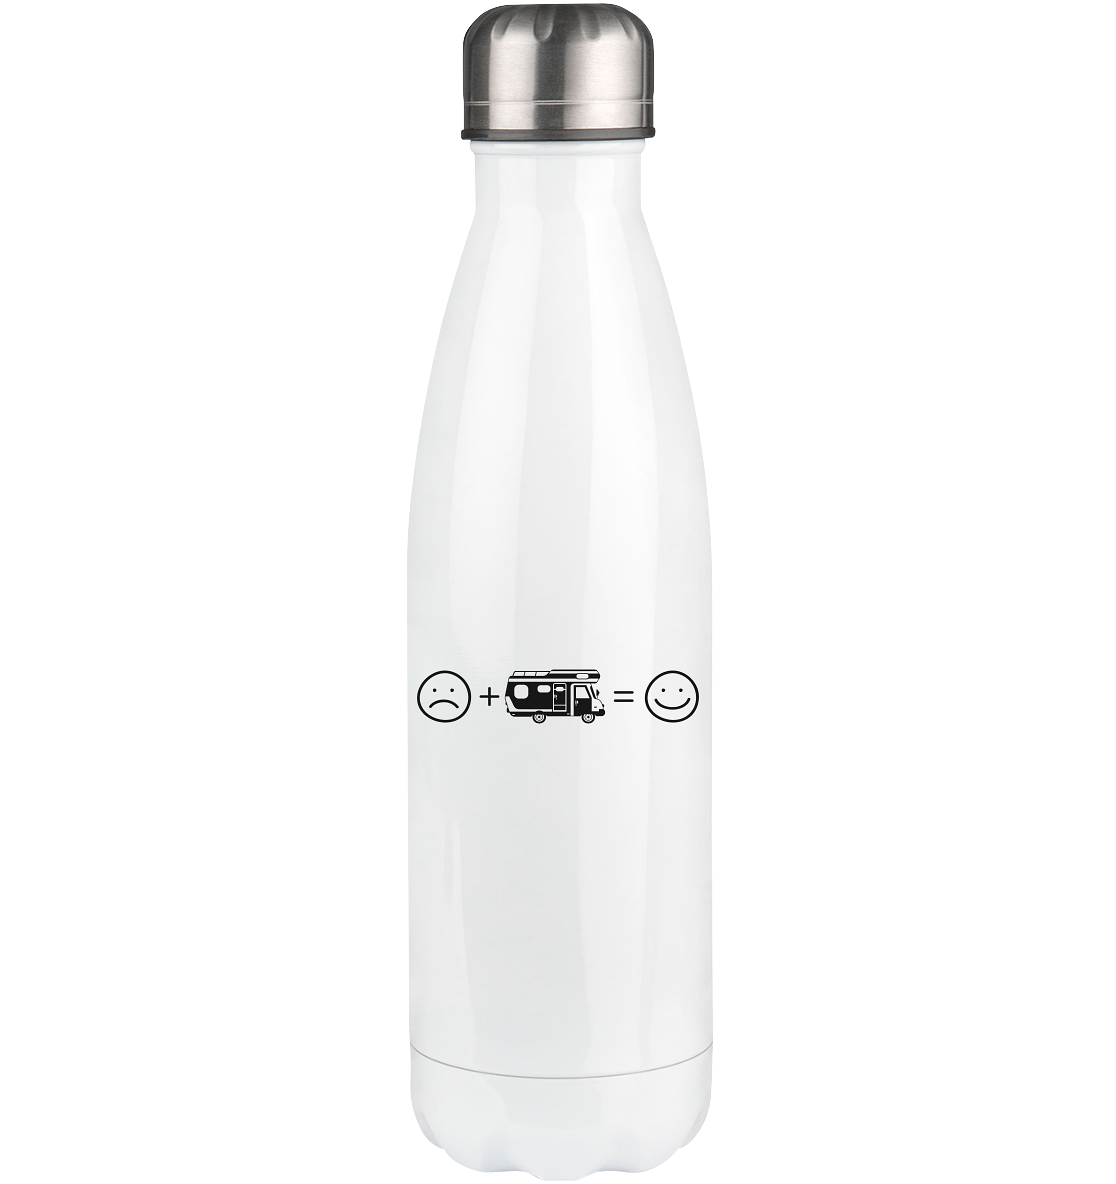 Emoji and Camping - Edelstahl Thermosflasche camping 500ml